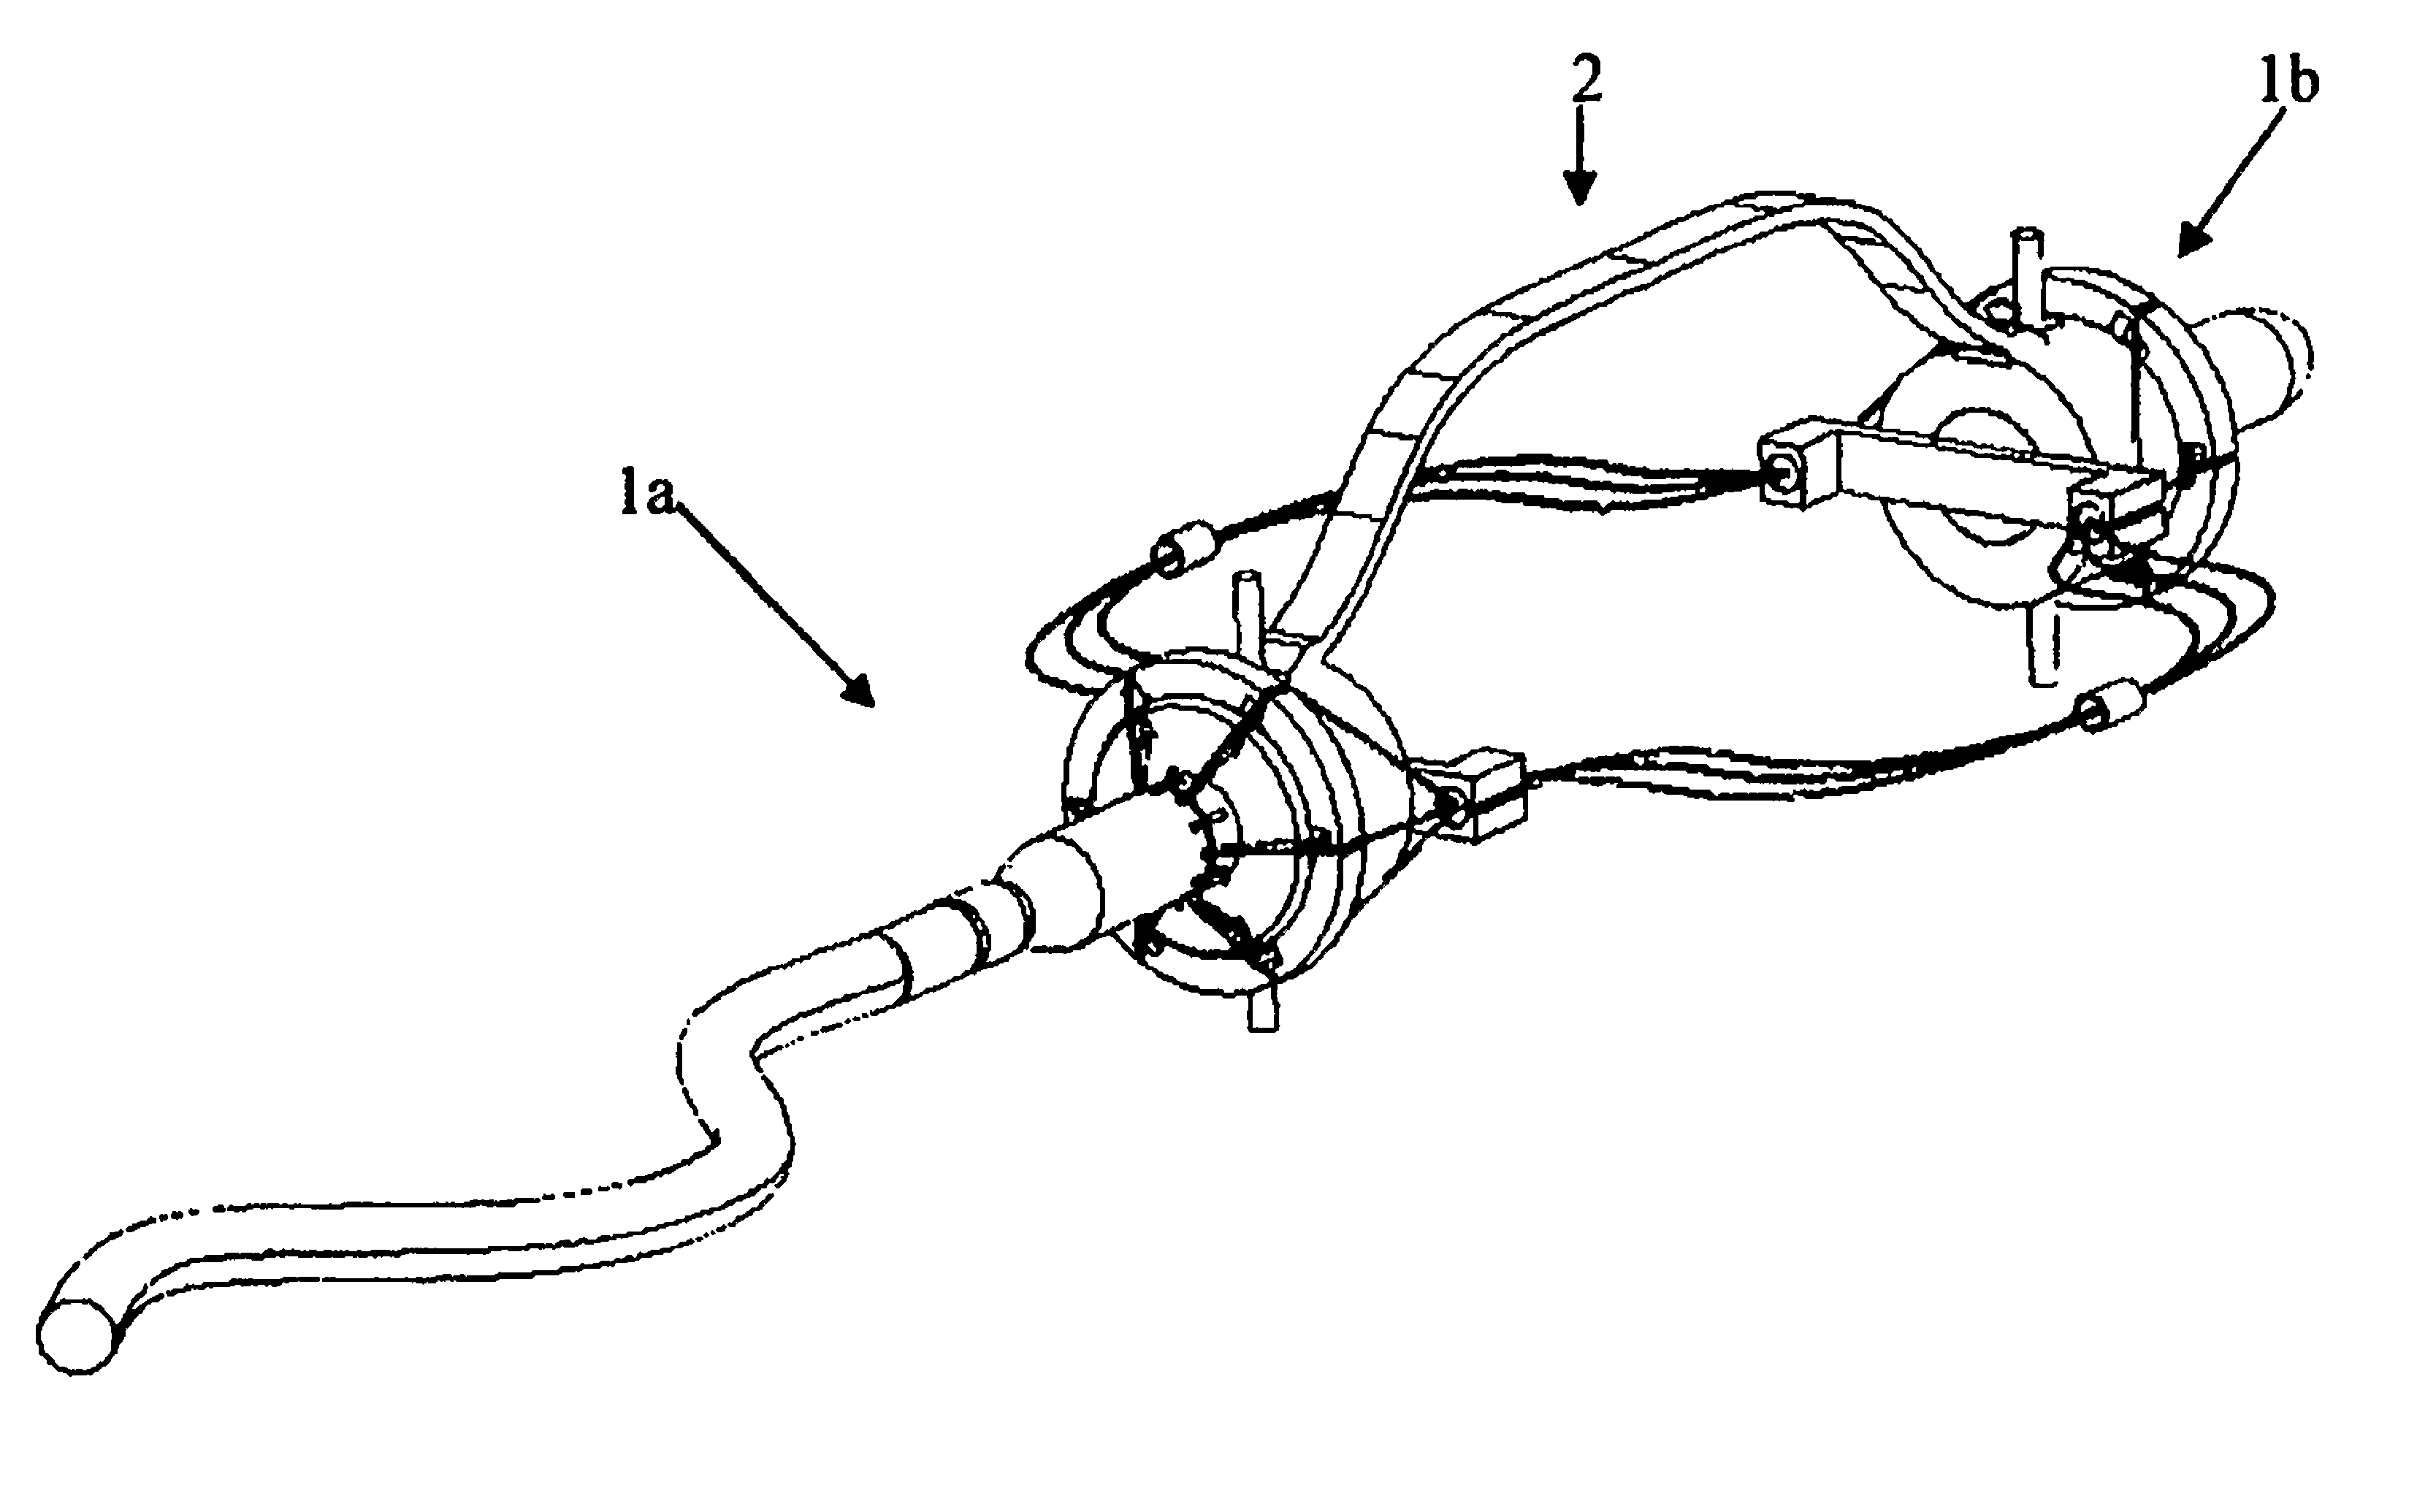 Assisted apparatus for anastomosis and method thereby of reconnecting the urethra to the bladder after removal of the prostate during a prostatectomy